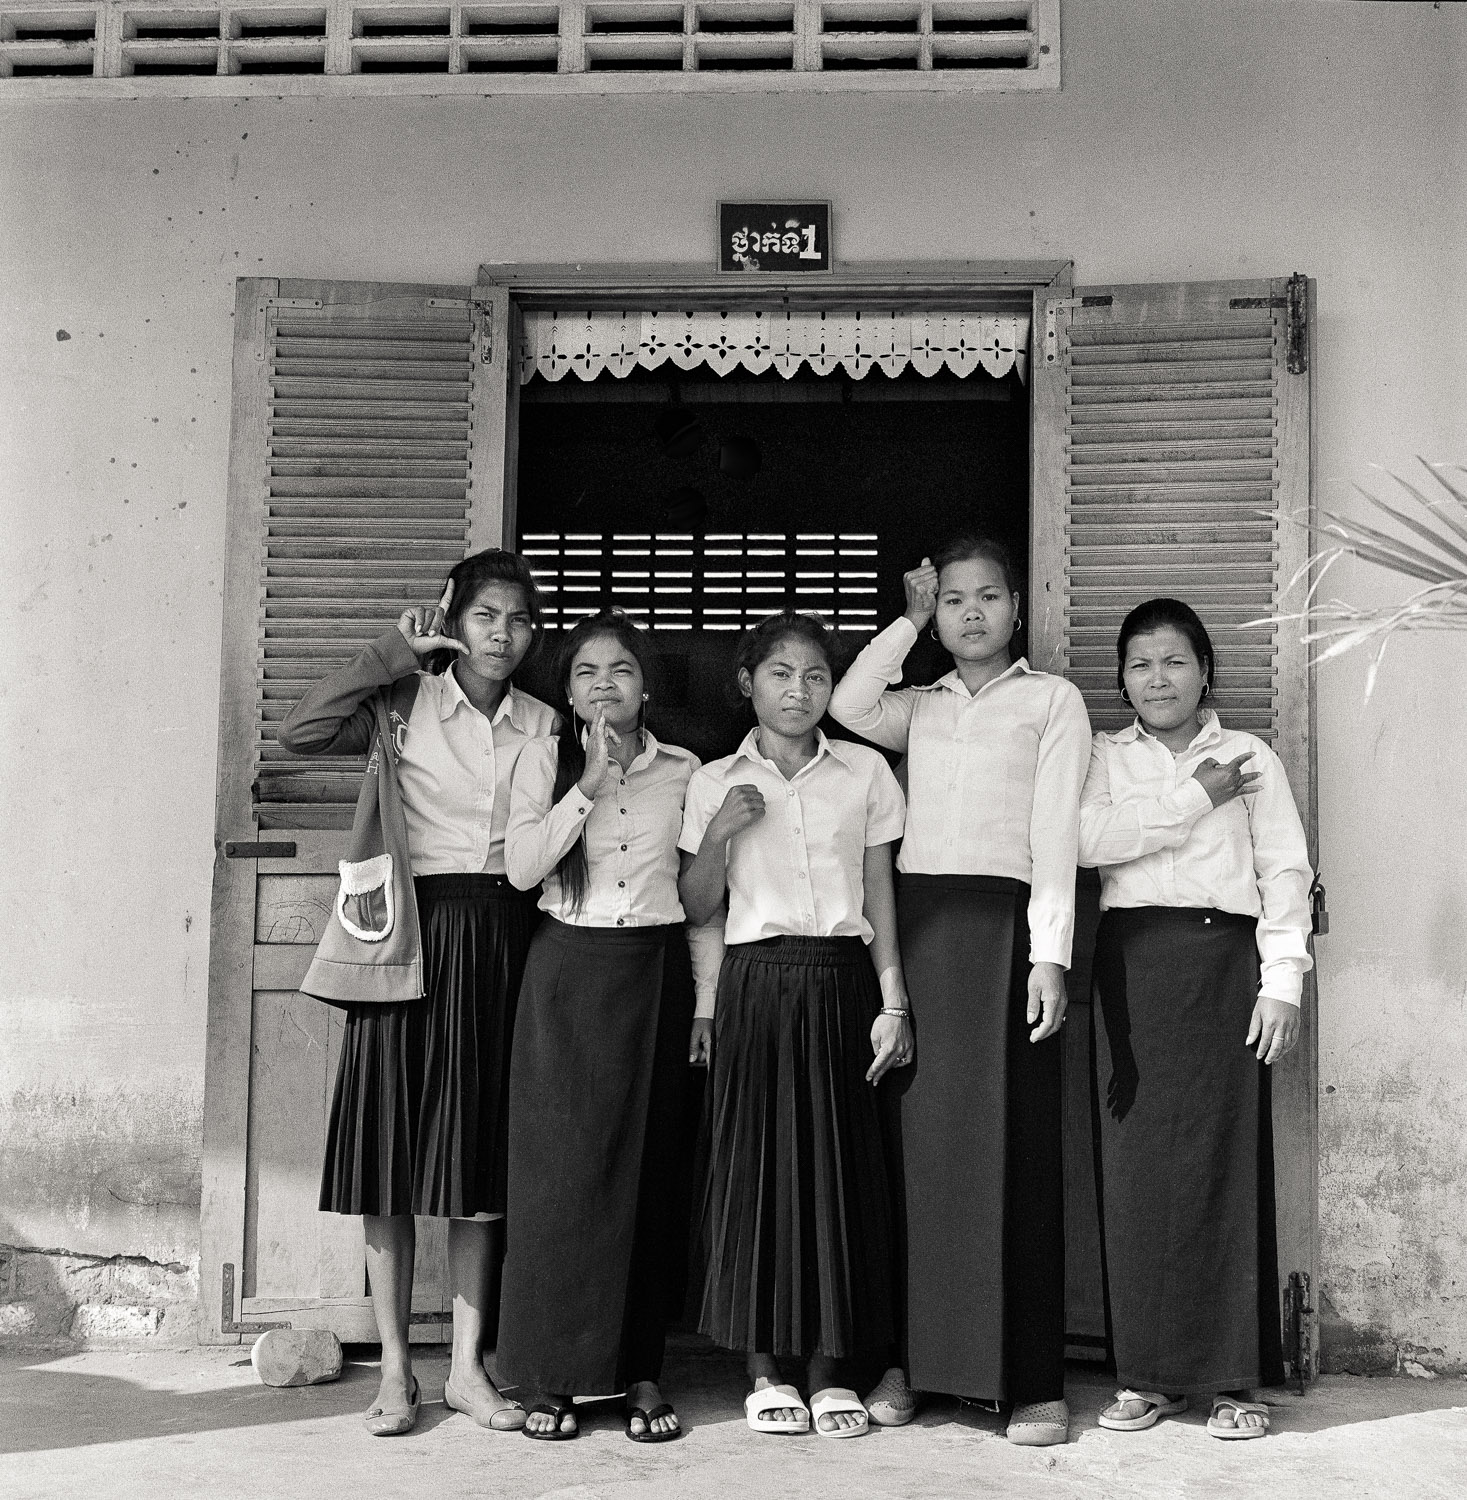  Basic Education students in Kampot, Cambodia.  Each student is showing their name sign in front of their classroom.

Right to left: Yem Sreynuan, Khoeum Pheanh, Min Chay, Chhoeul Mom (2nd year Basic Education Student, all other are 1st year students